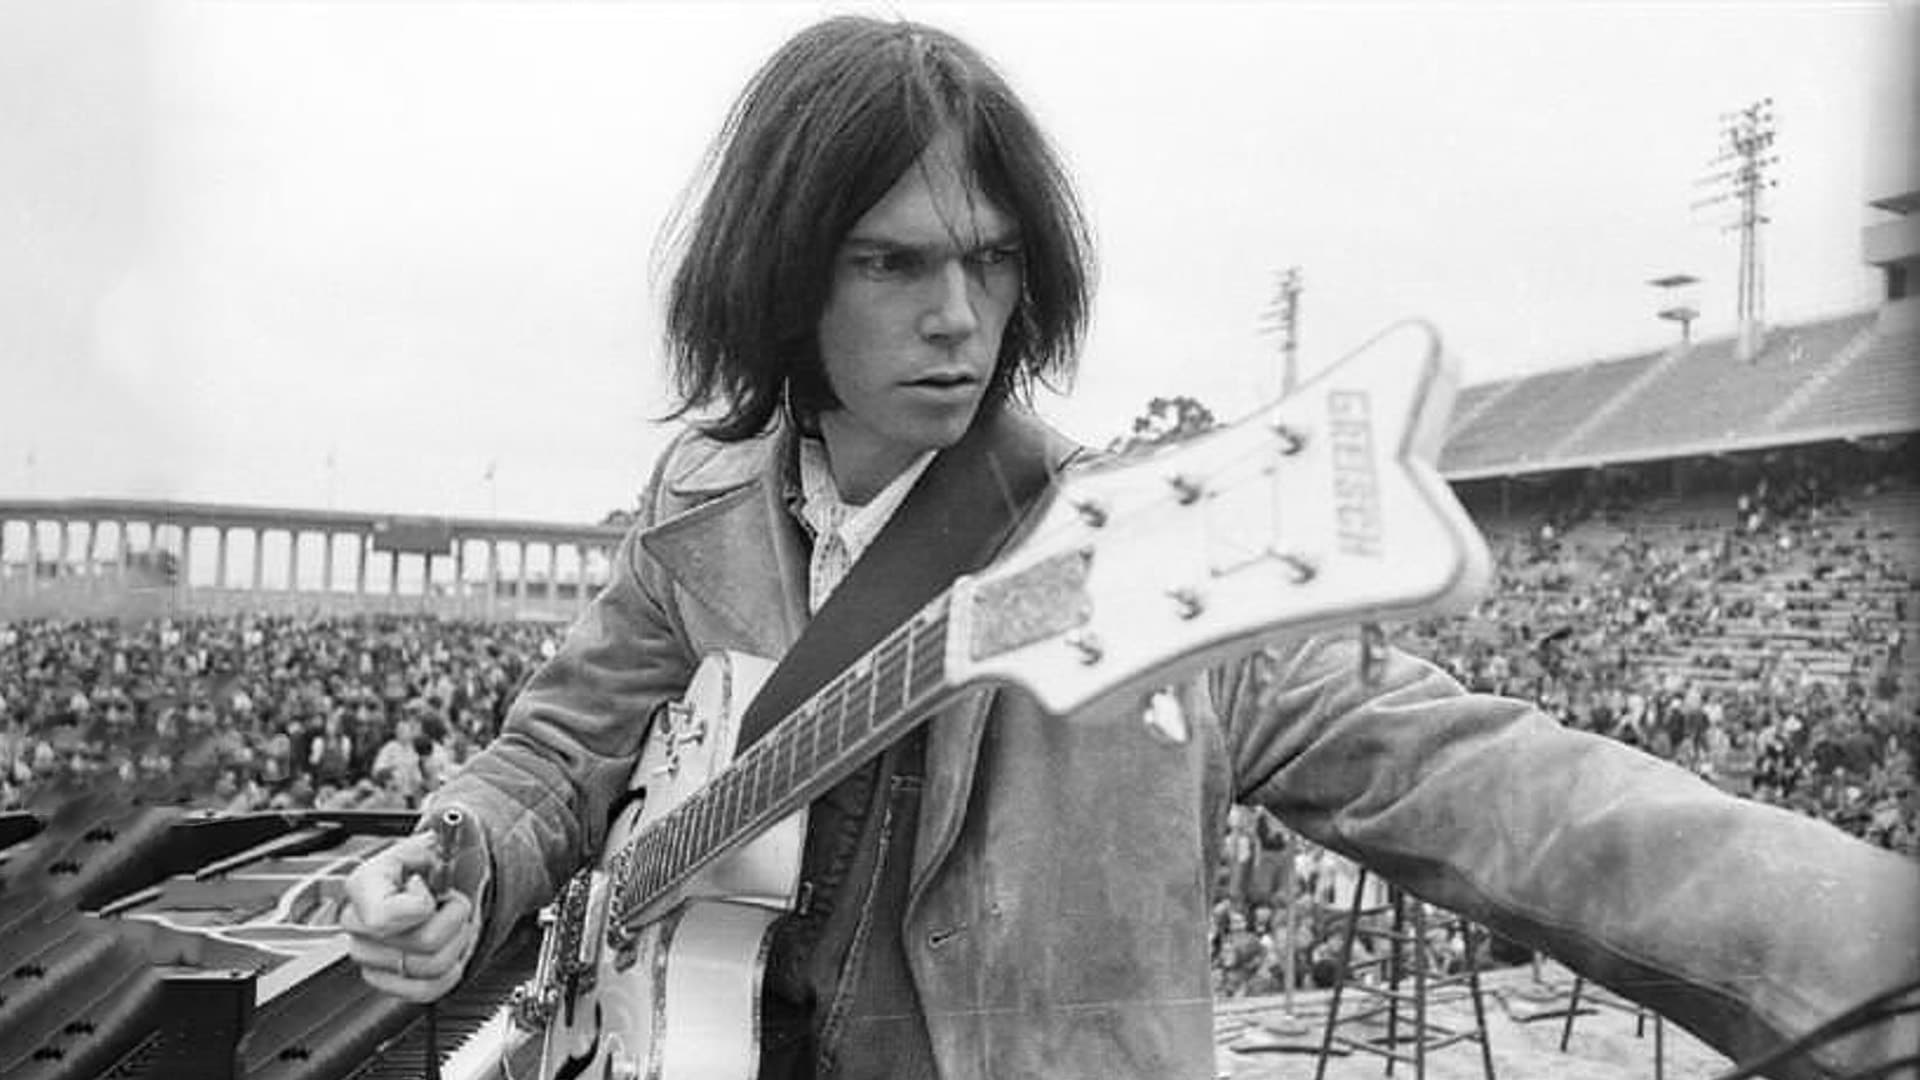 Neil Young & Crazy Horse - My My, Hey Hey (Out Of The Blue)